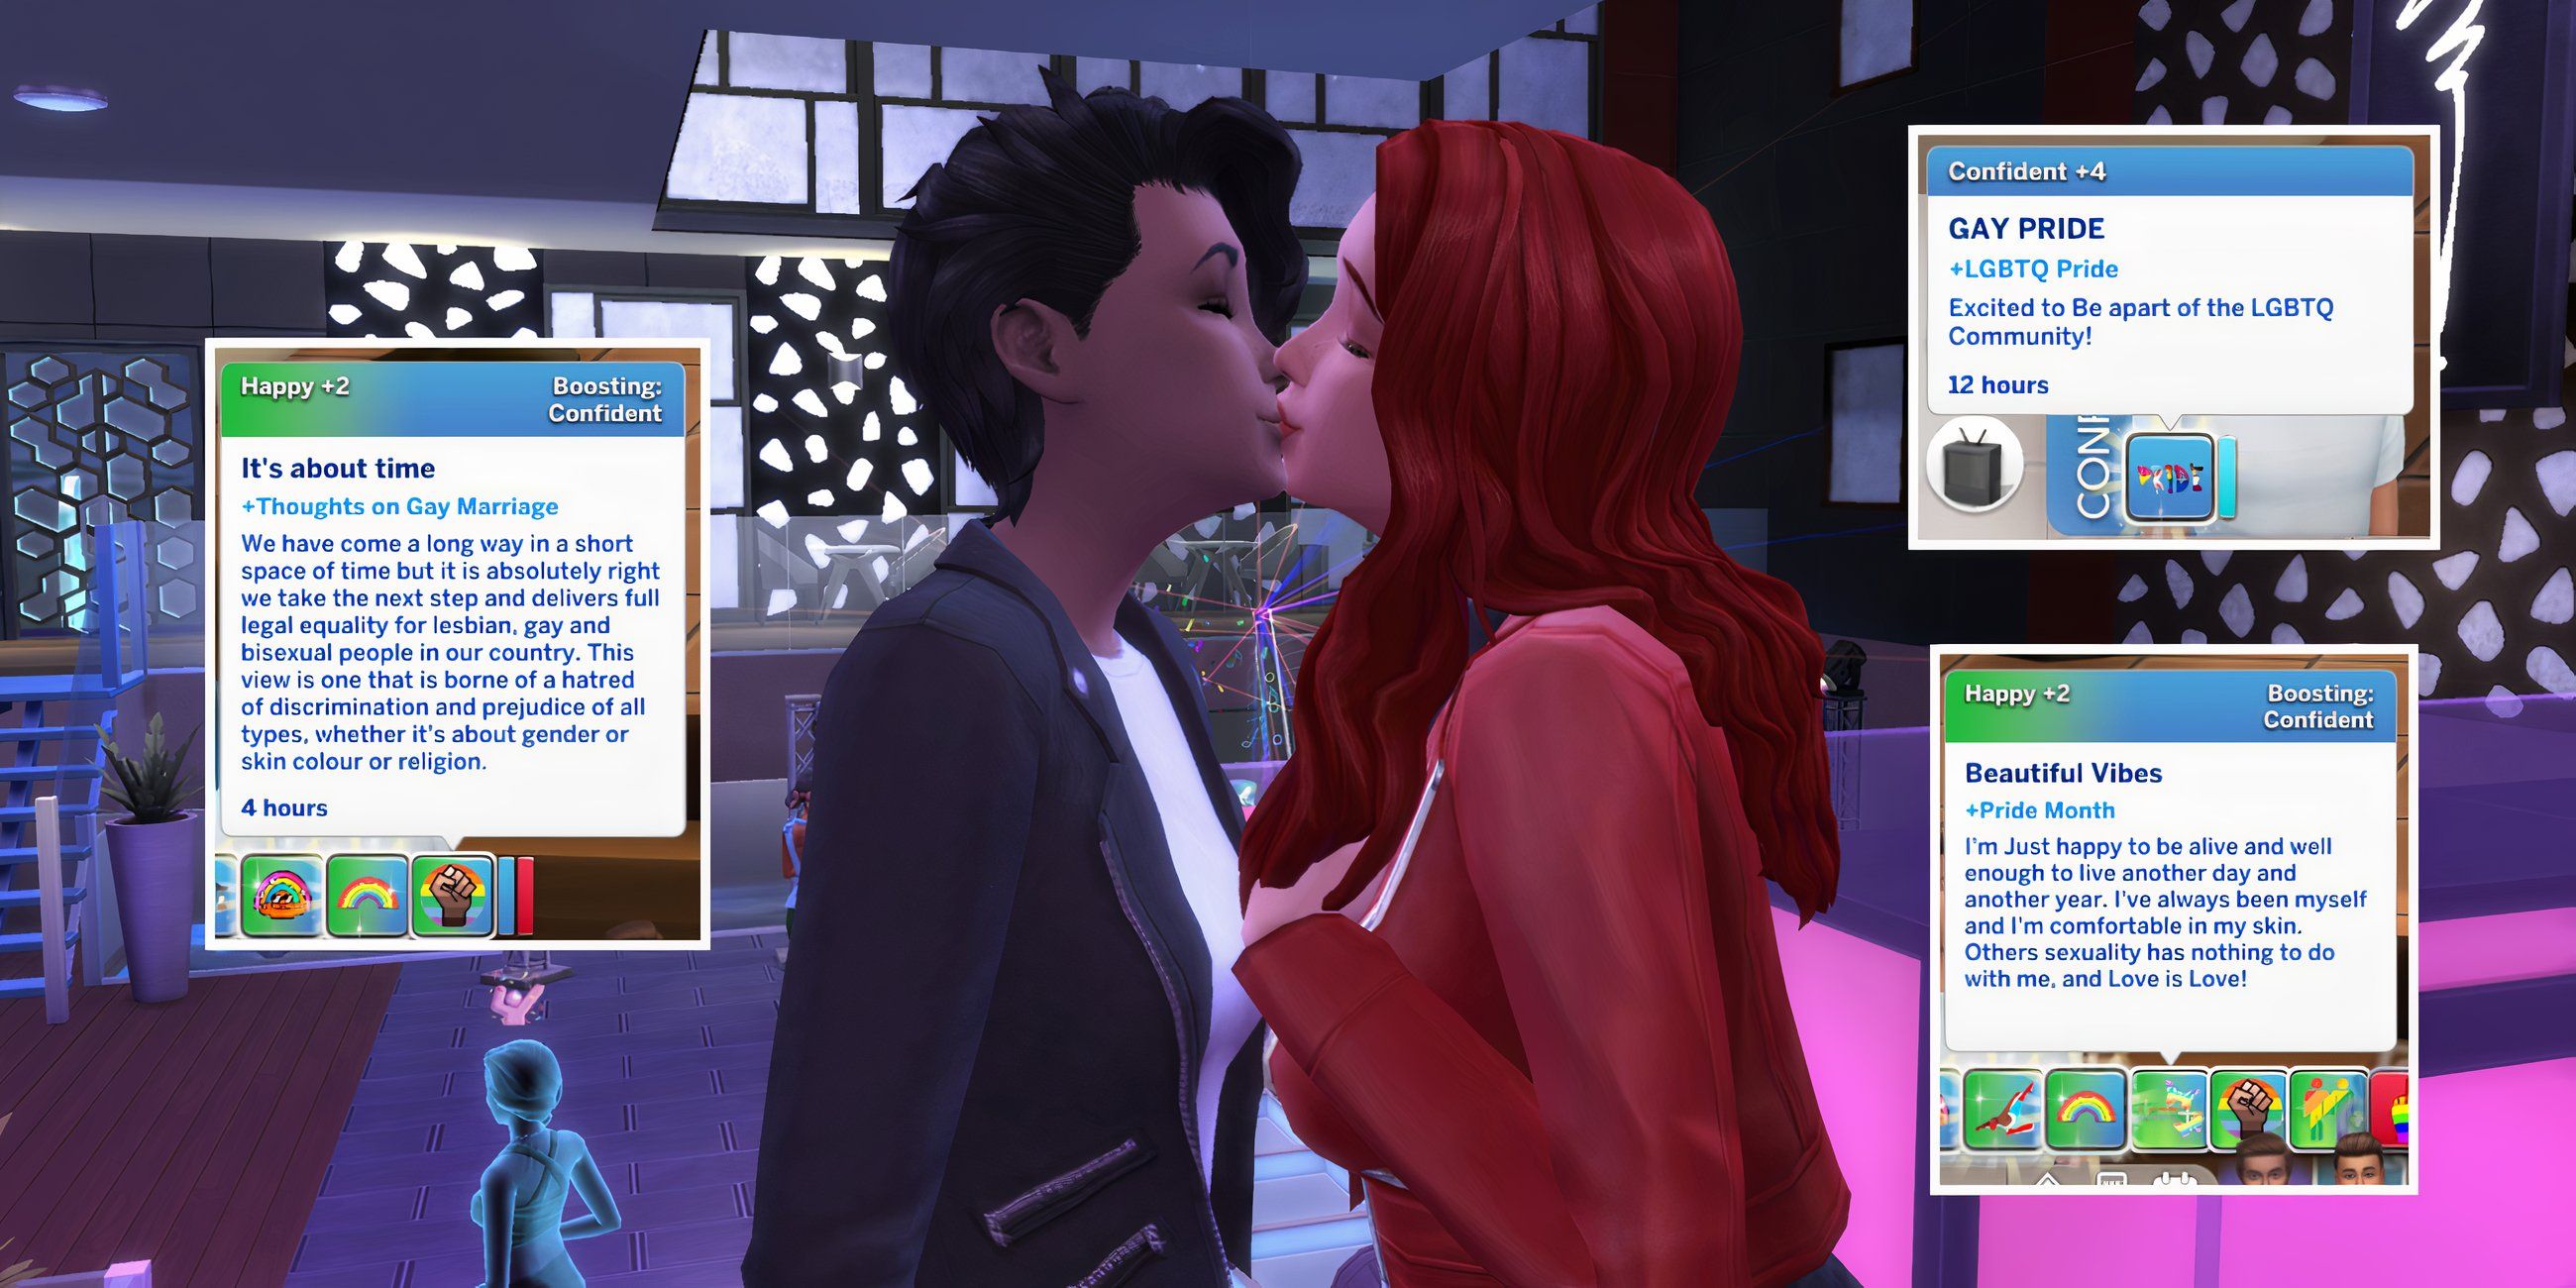 Sims at a pride event and a variety of new moodlets from the Pride Mini Mod